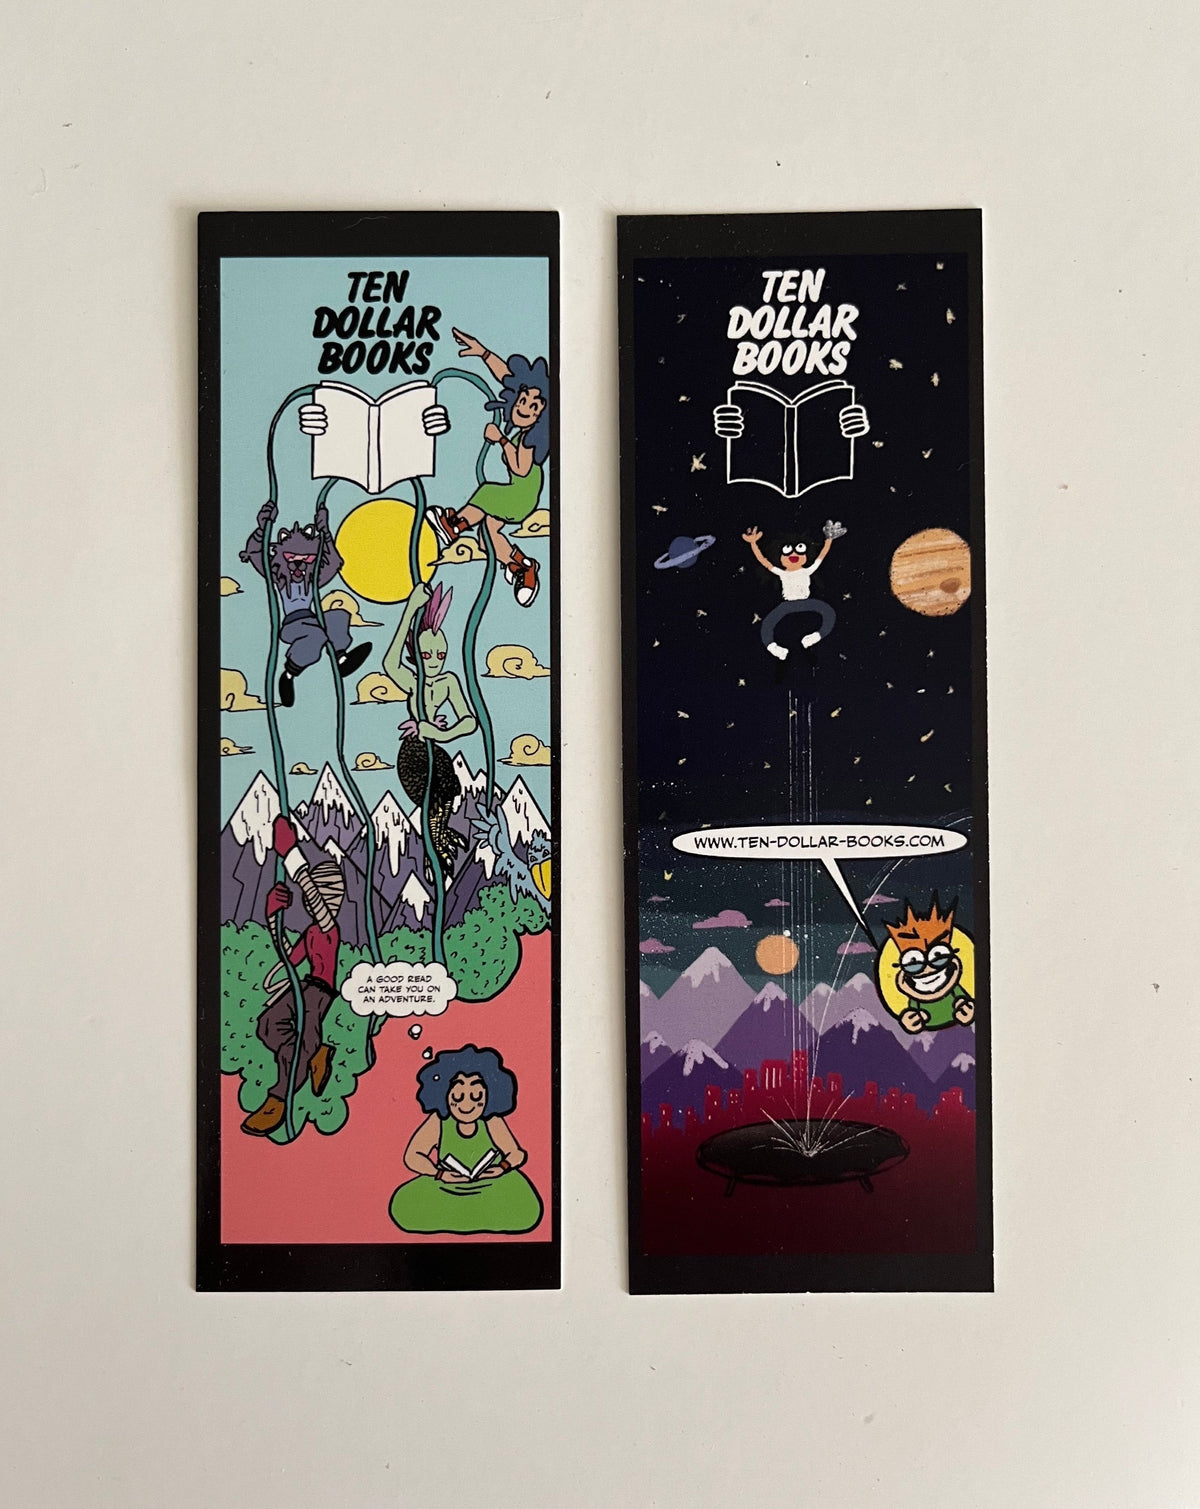 Bookmarks with art by Lyle Omolayo